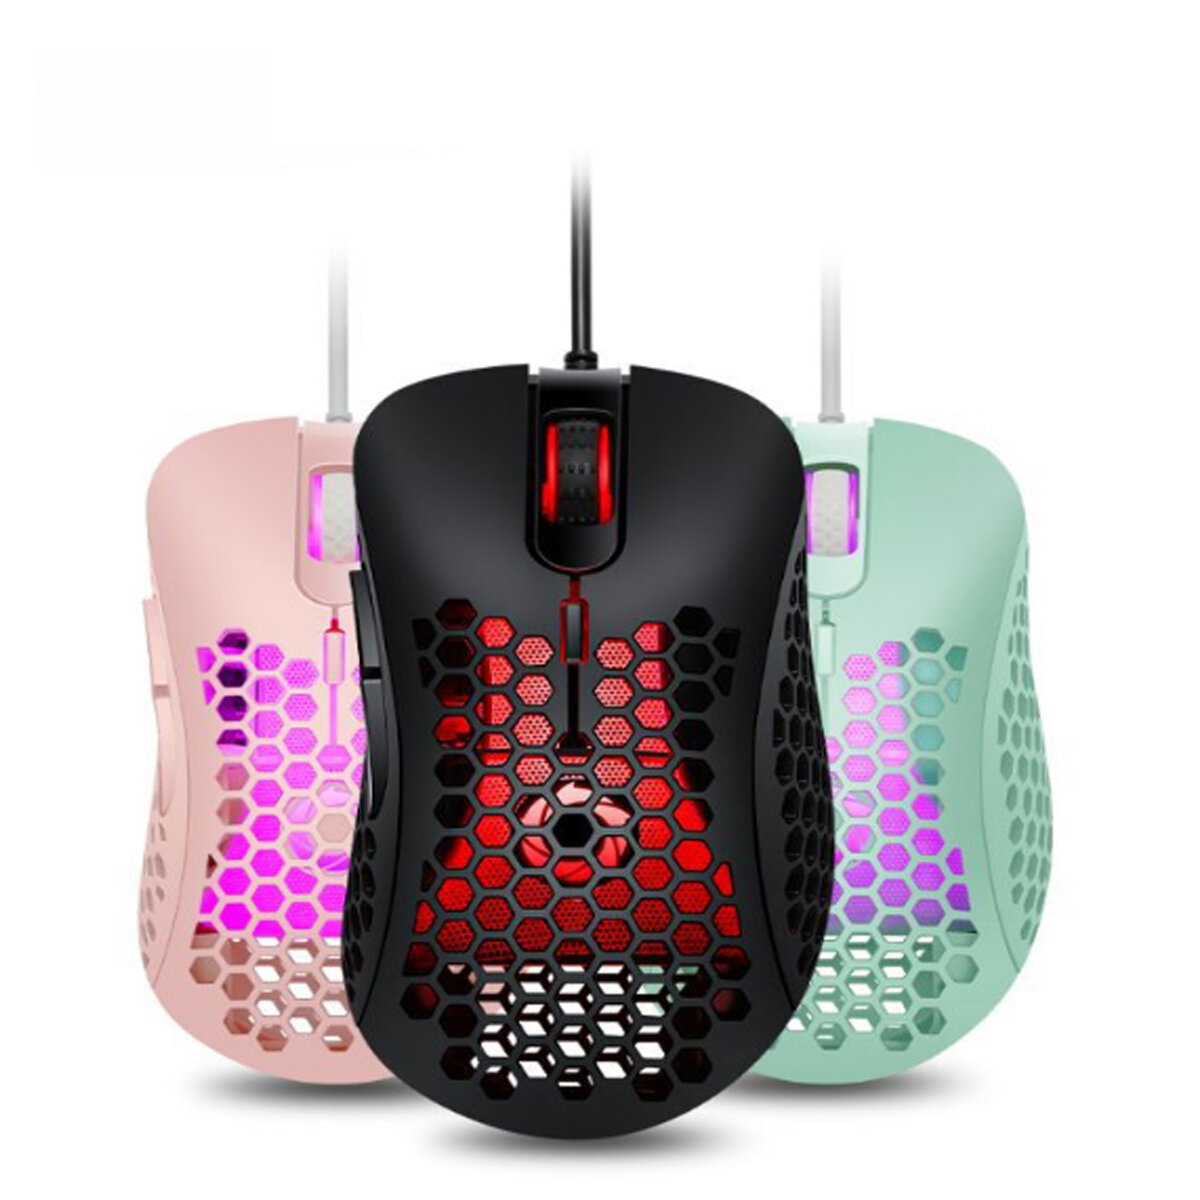 

Light Magic V18 Wired Game Mouse Breathing Colorful Hollow Honeycomb 3200DPI Gaming Mouse USB Wired Gamer Mice for Compu